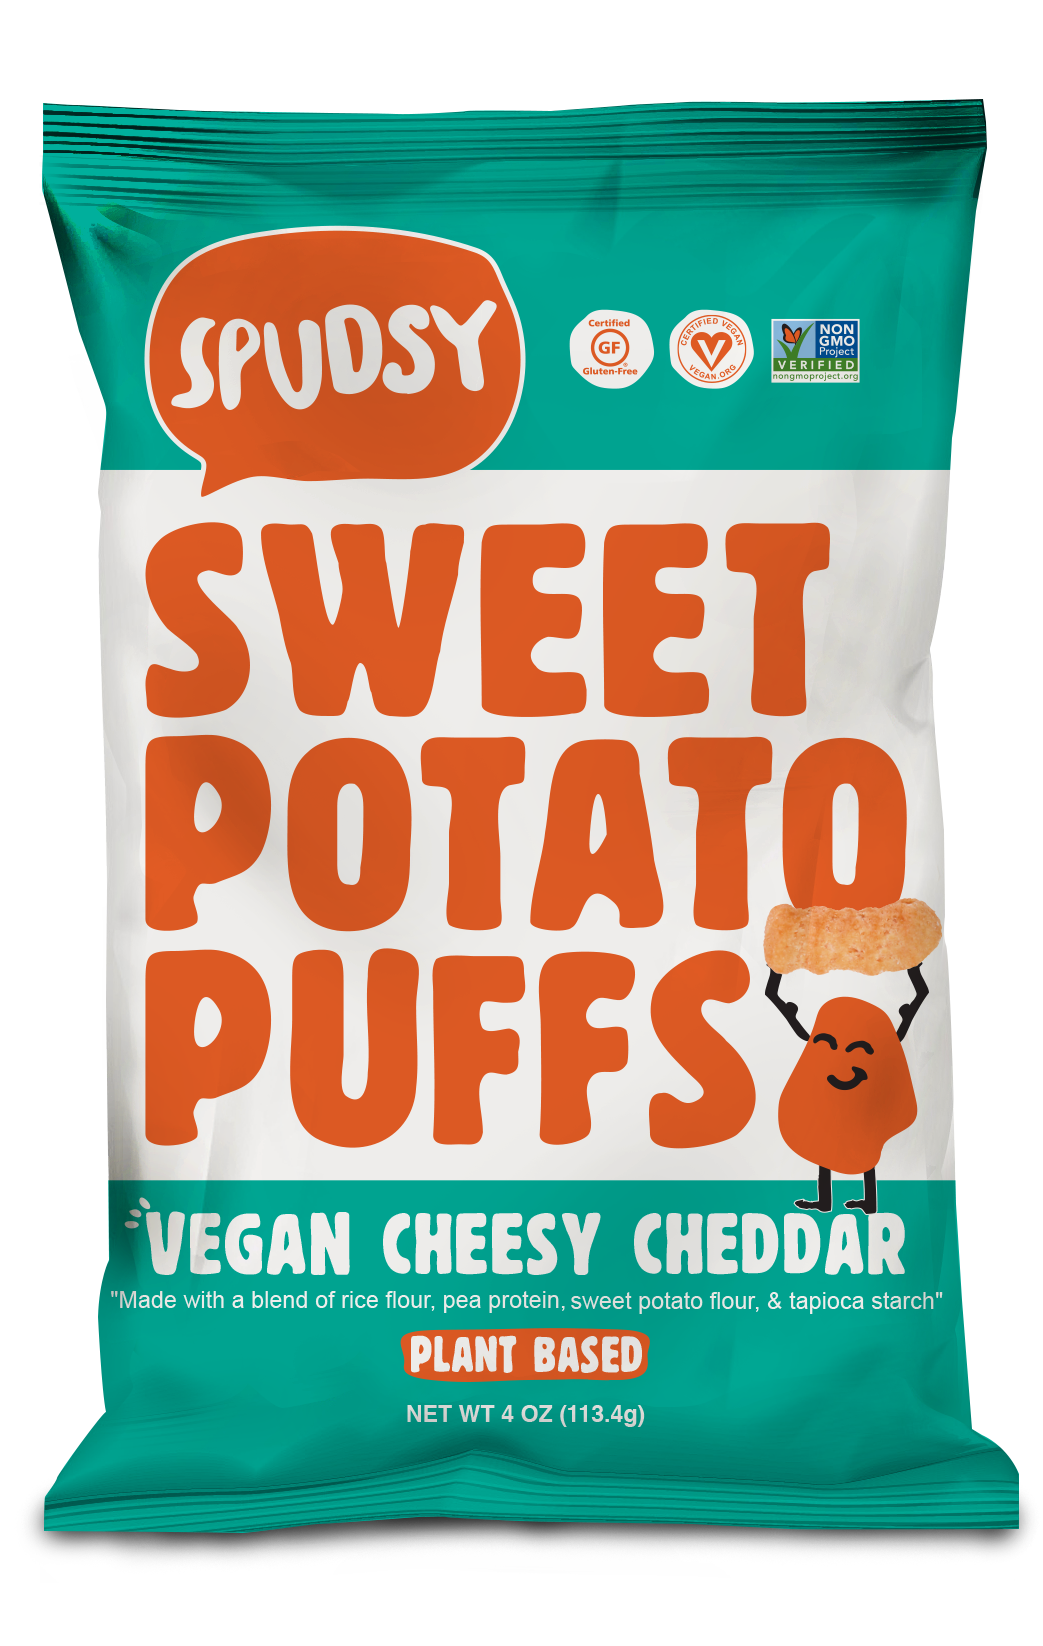 SPUDSY: A New Chip On The Block